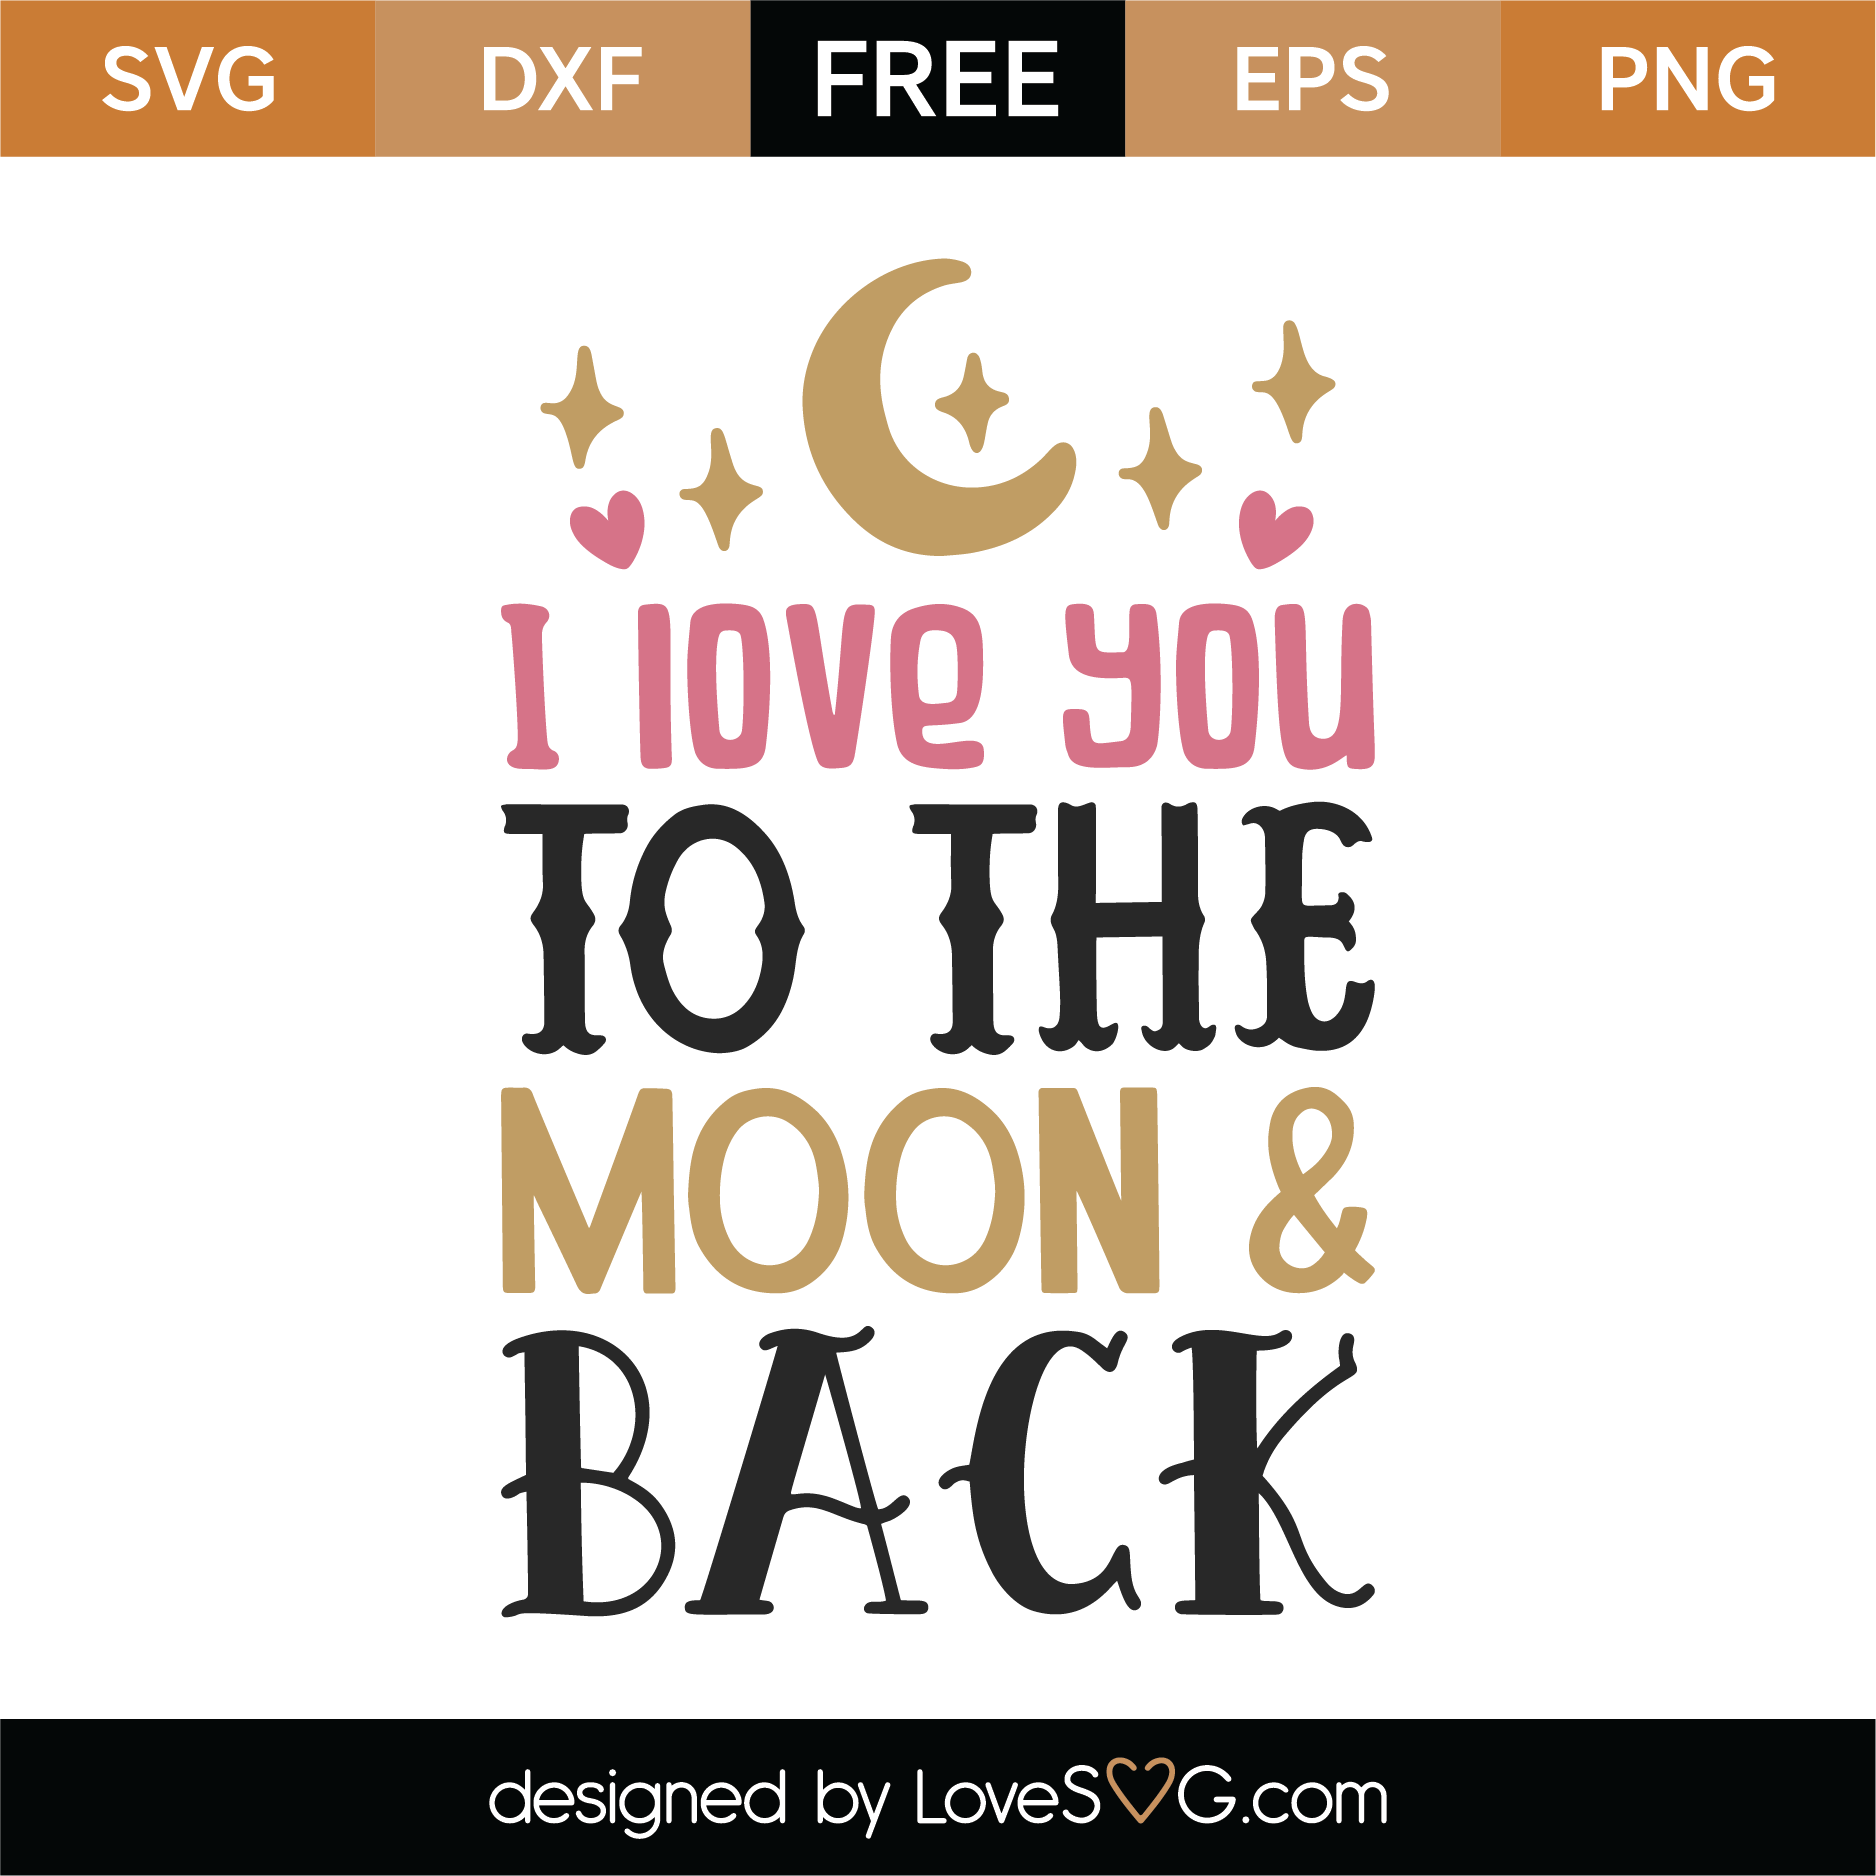 Download Free I Love You To The Moon And Back SVG Cut File ...